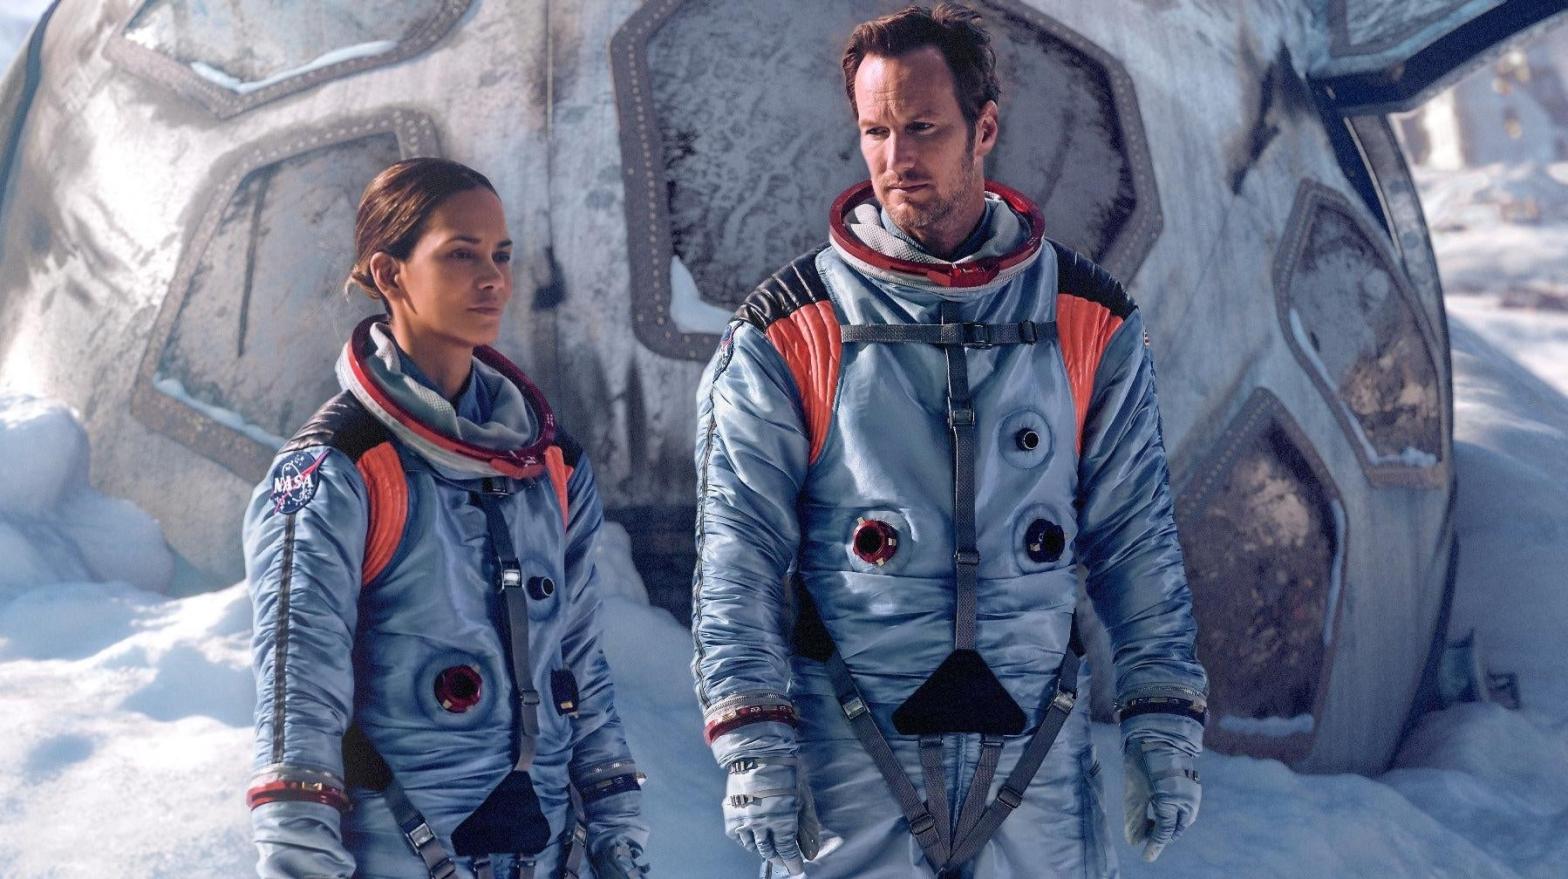 It's smiles all around for Halle Berry and Patrick Wilson in Moonfall. (Image: Lionsgate)